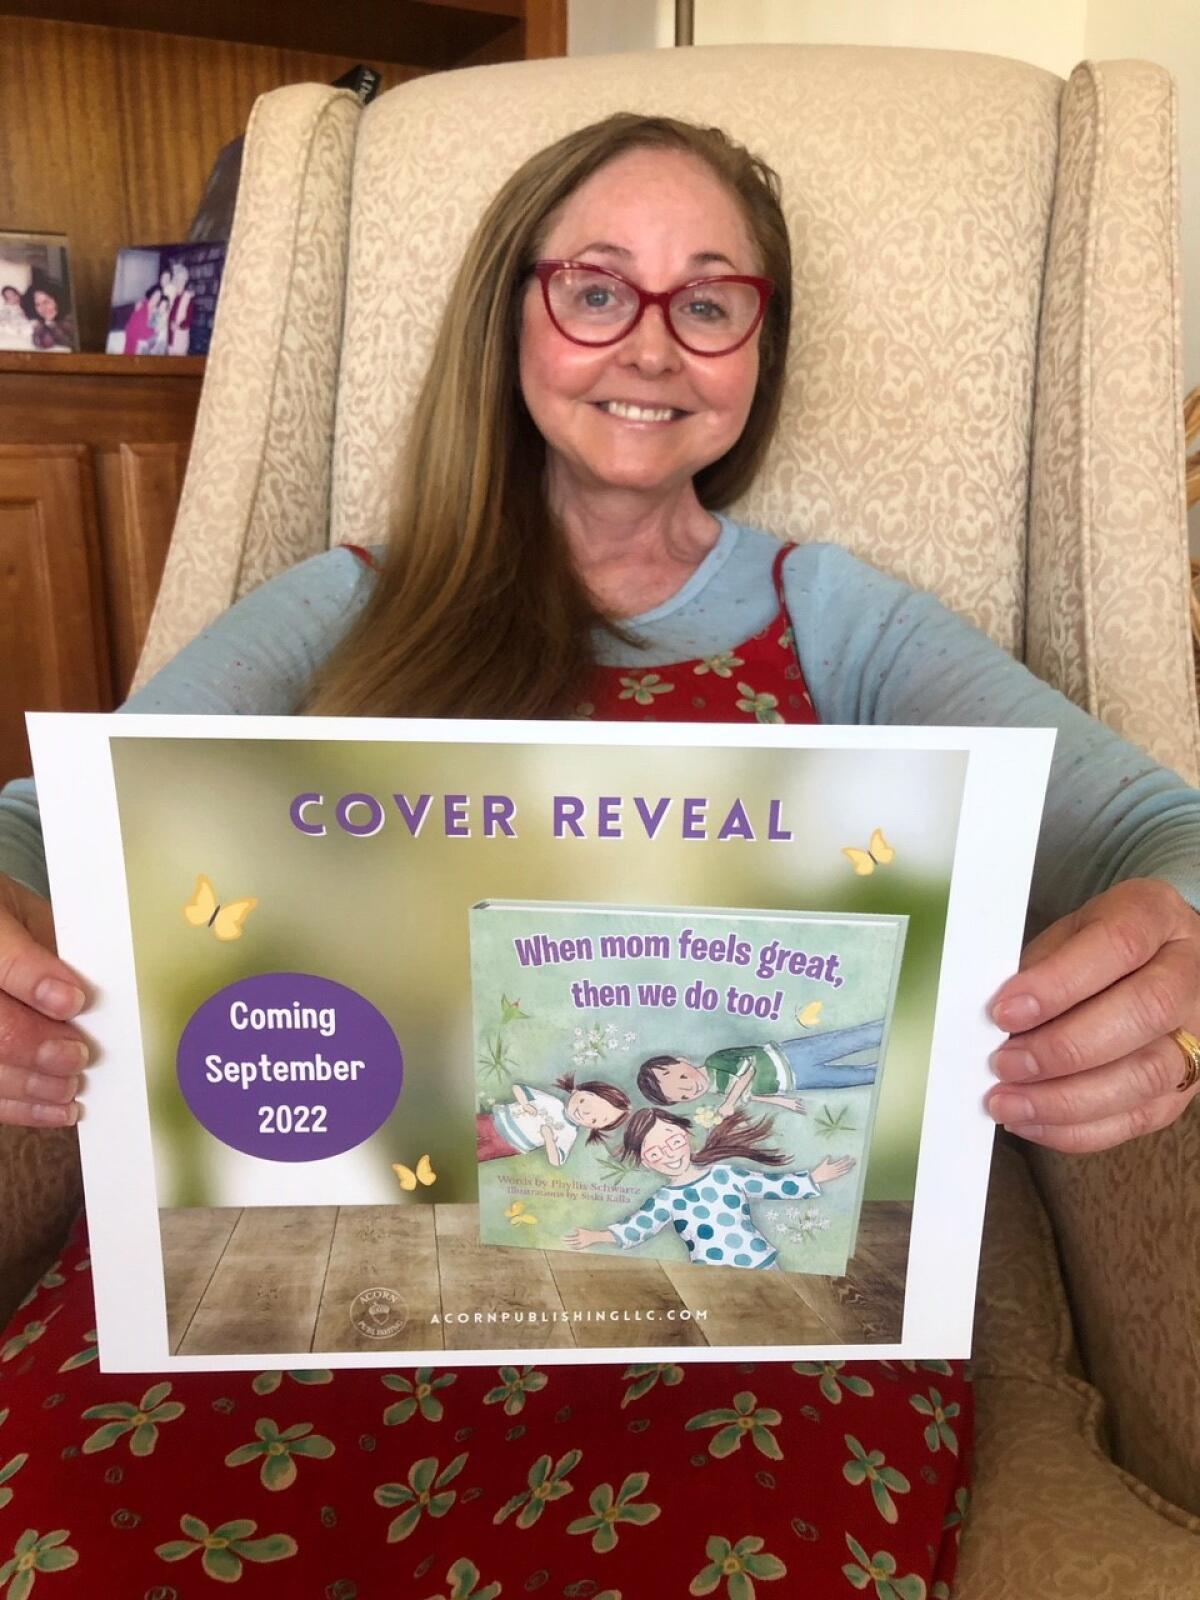 Phyllis Schwartz displays the cover of her children’s book, which will be released Sept. 23 by Acorn Publishing.